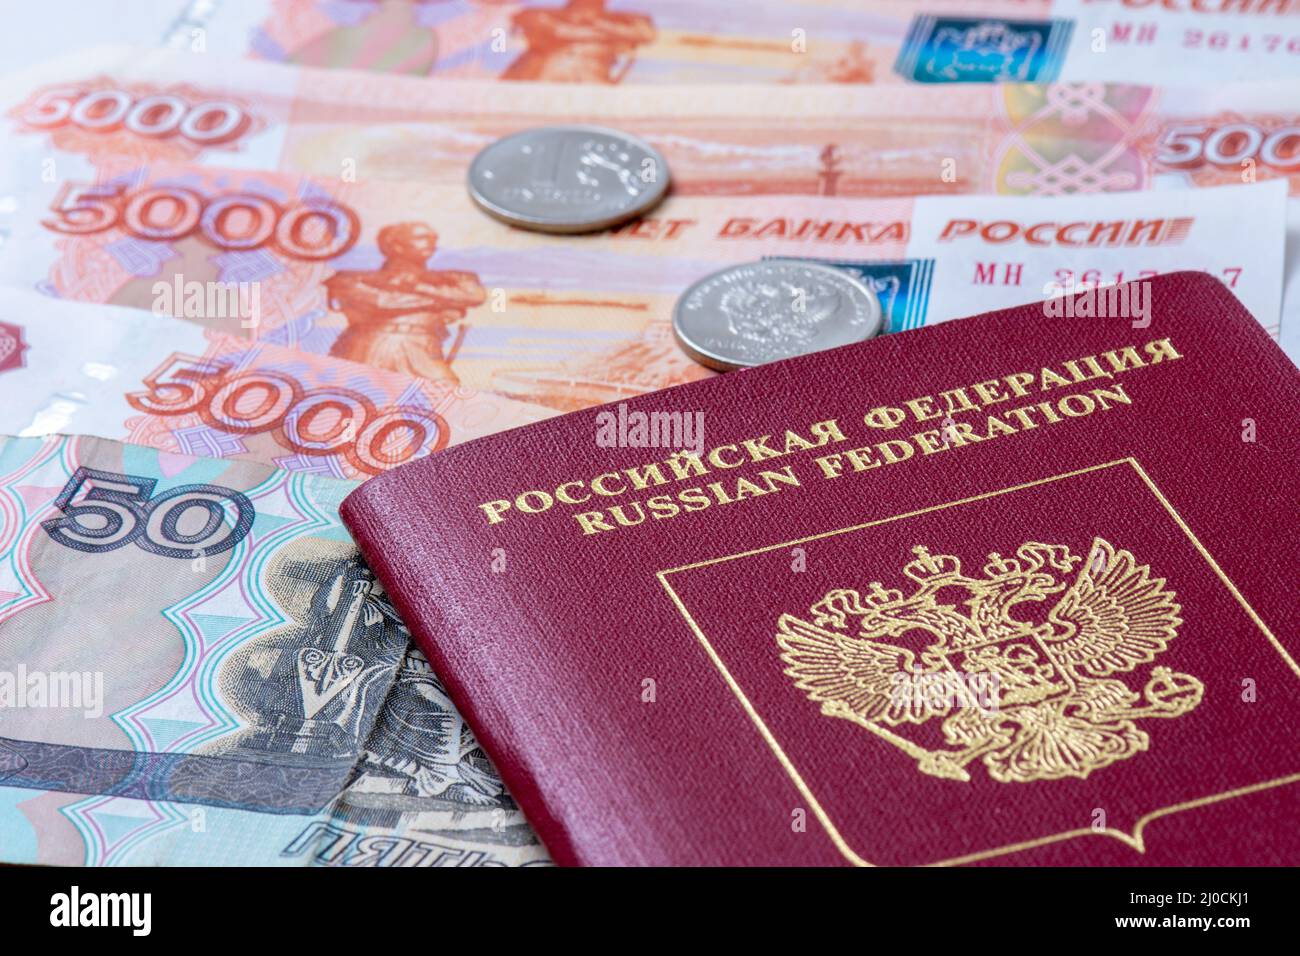 Russian Federation passport and banknotes (rubles). Concepts of travel, economic sanctions, money transfers and inflation for citizens of Russia Stock Photo